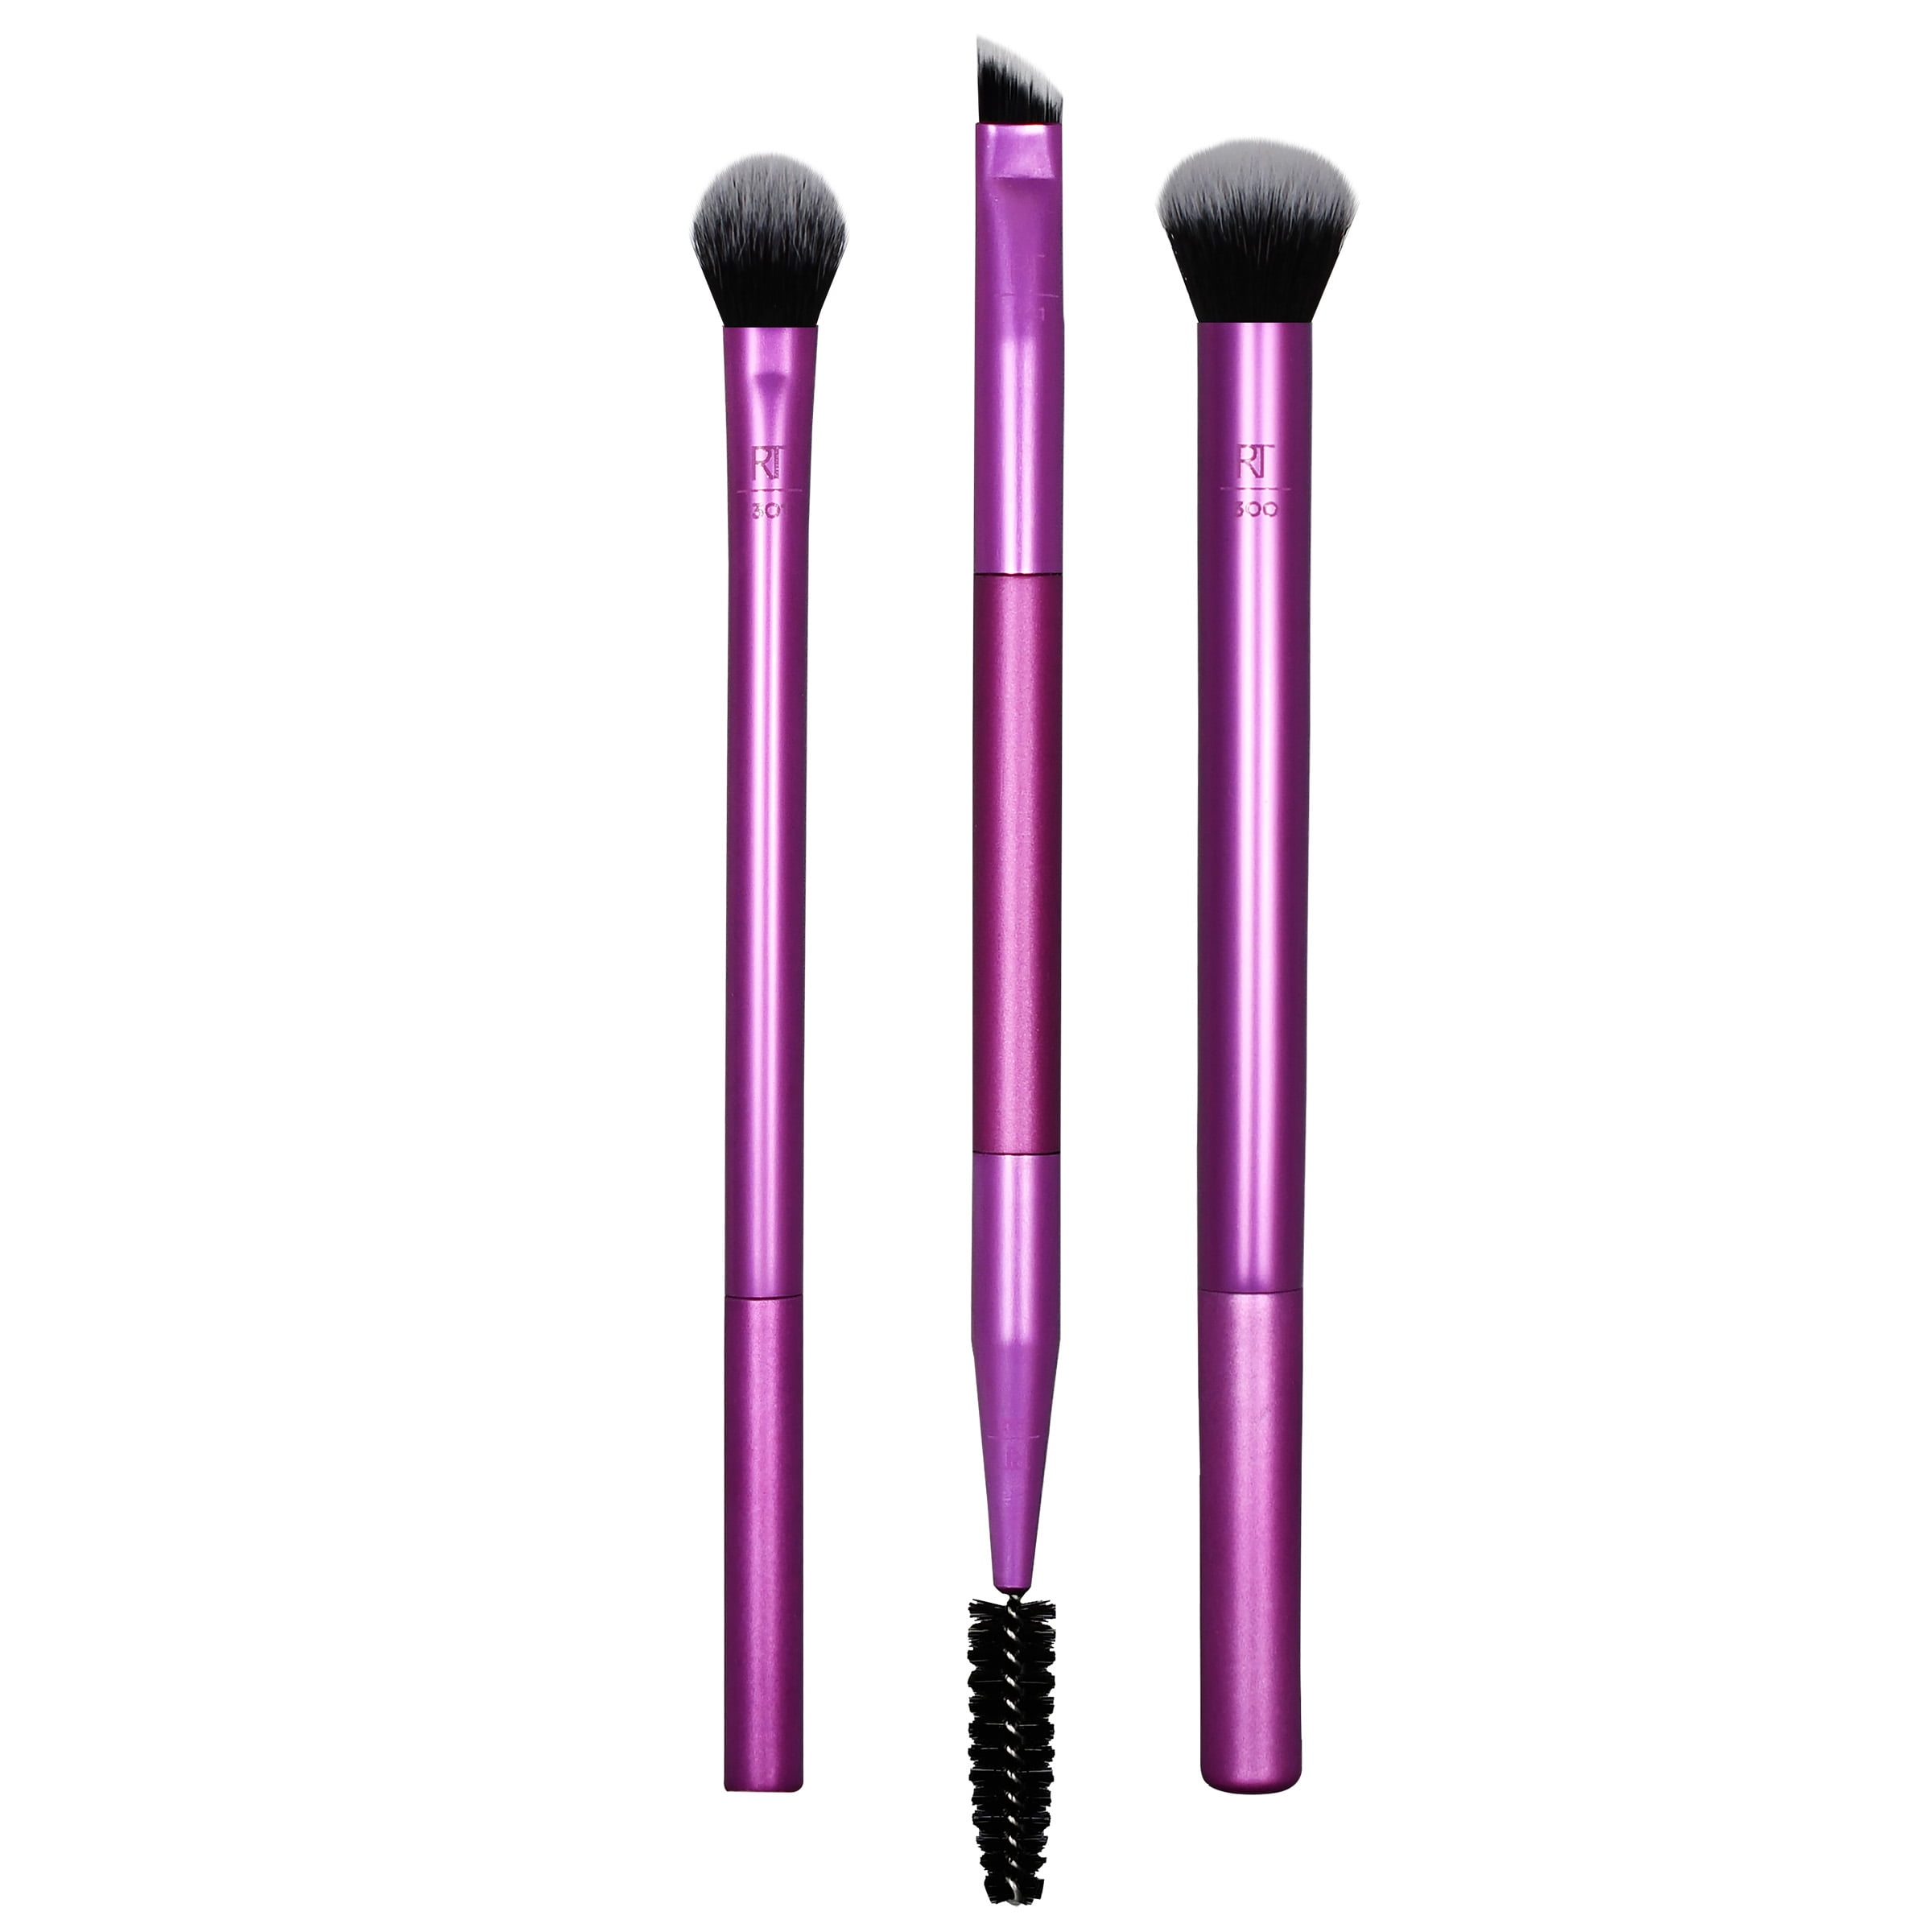 Real Techniques Eye Shade & Blend Makeup Brush Trio, For Layering Powder  Shadows Evenly, Shaping & Grooming Brows, Defined Makeup Look, 3 Count 